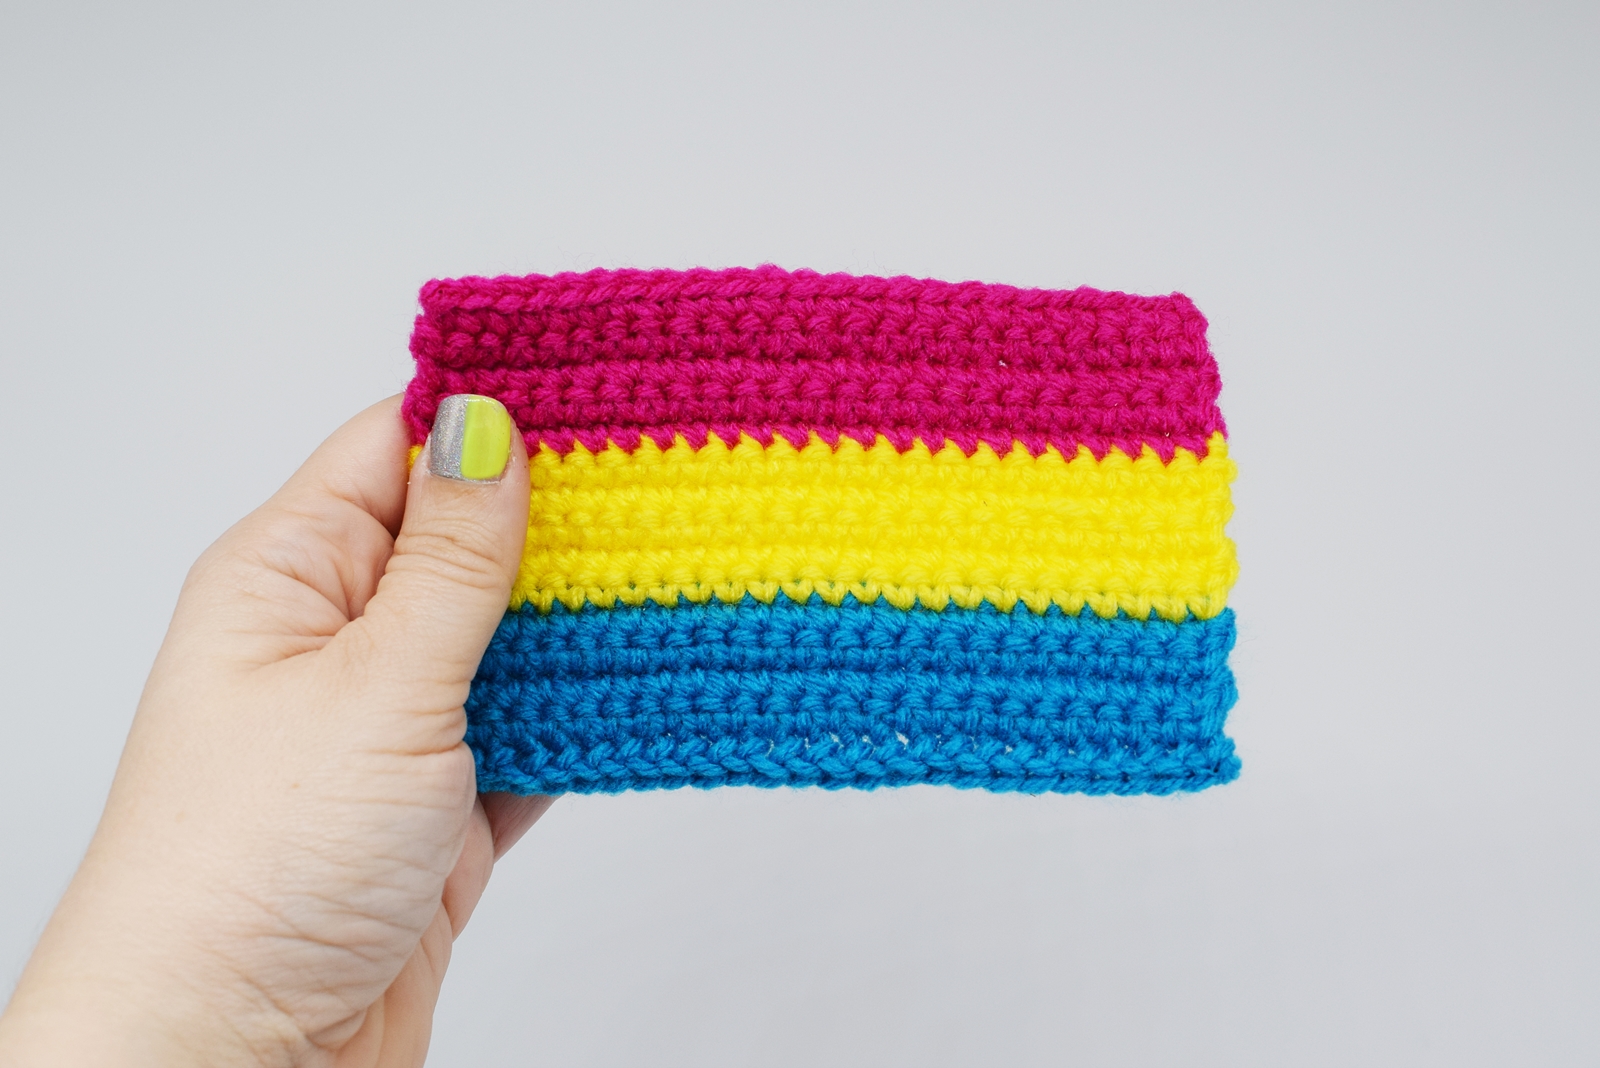 hand holds a crochet pansexual pride flag against a white background